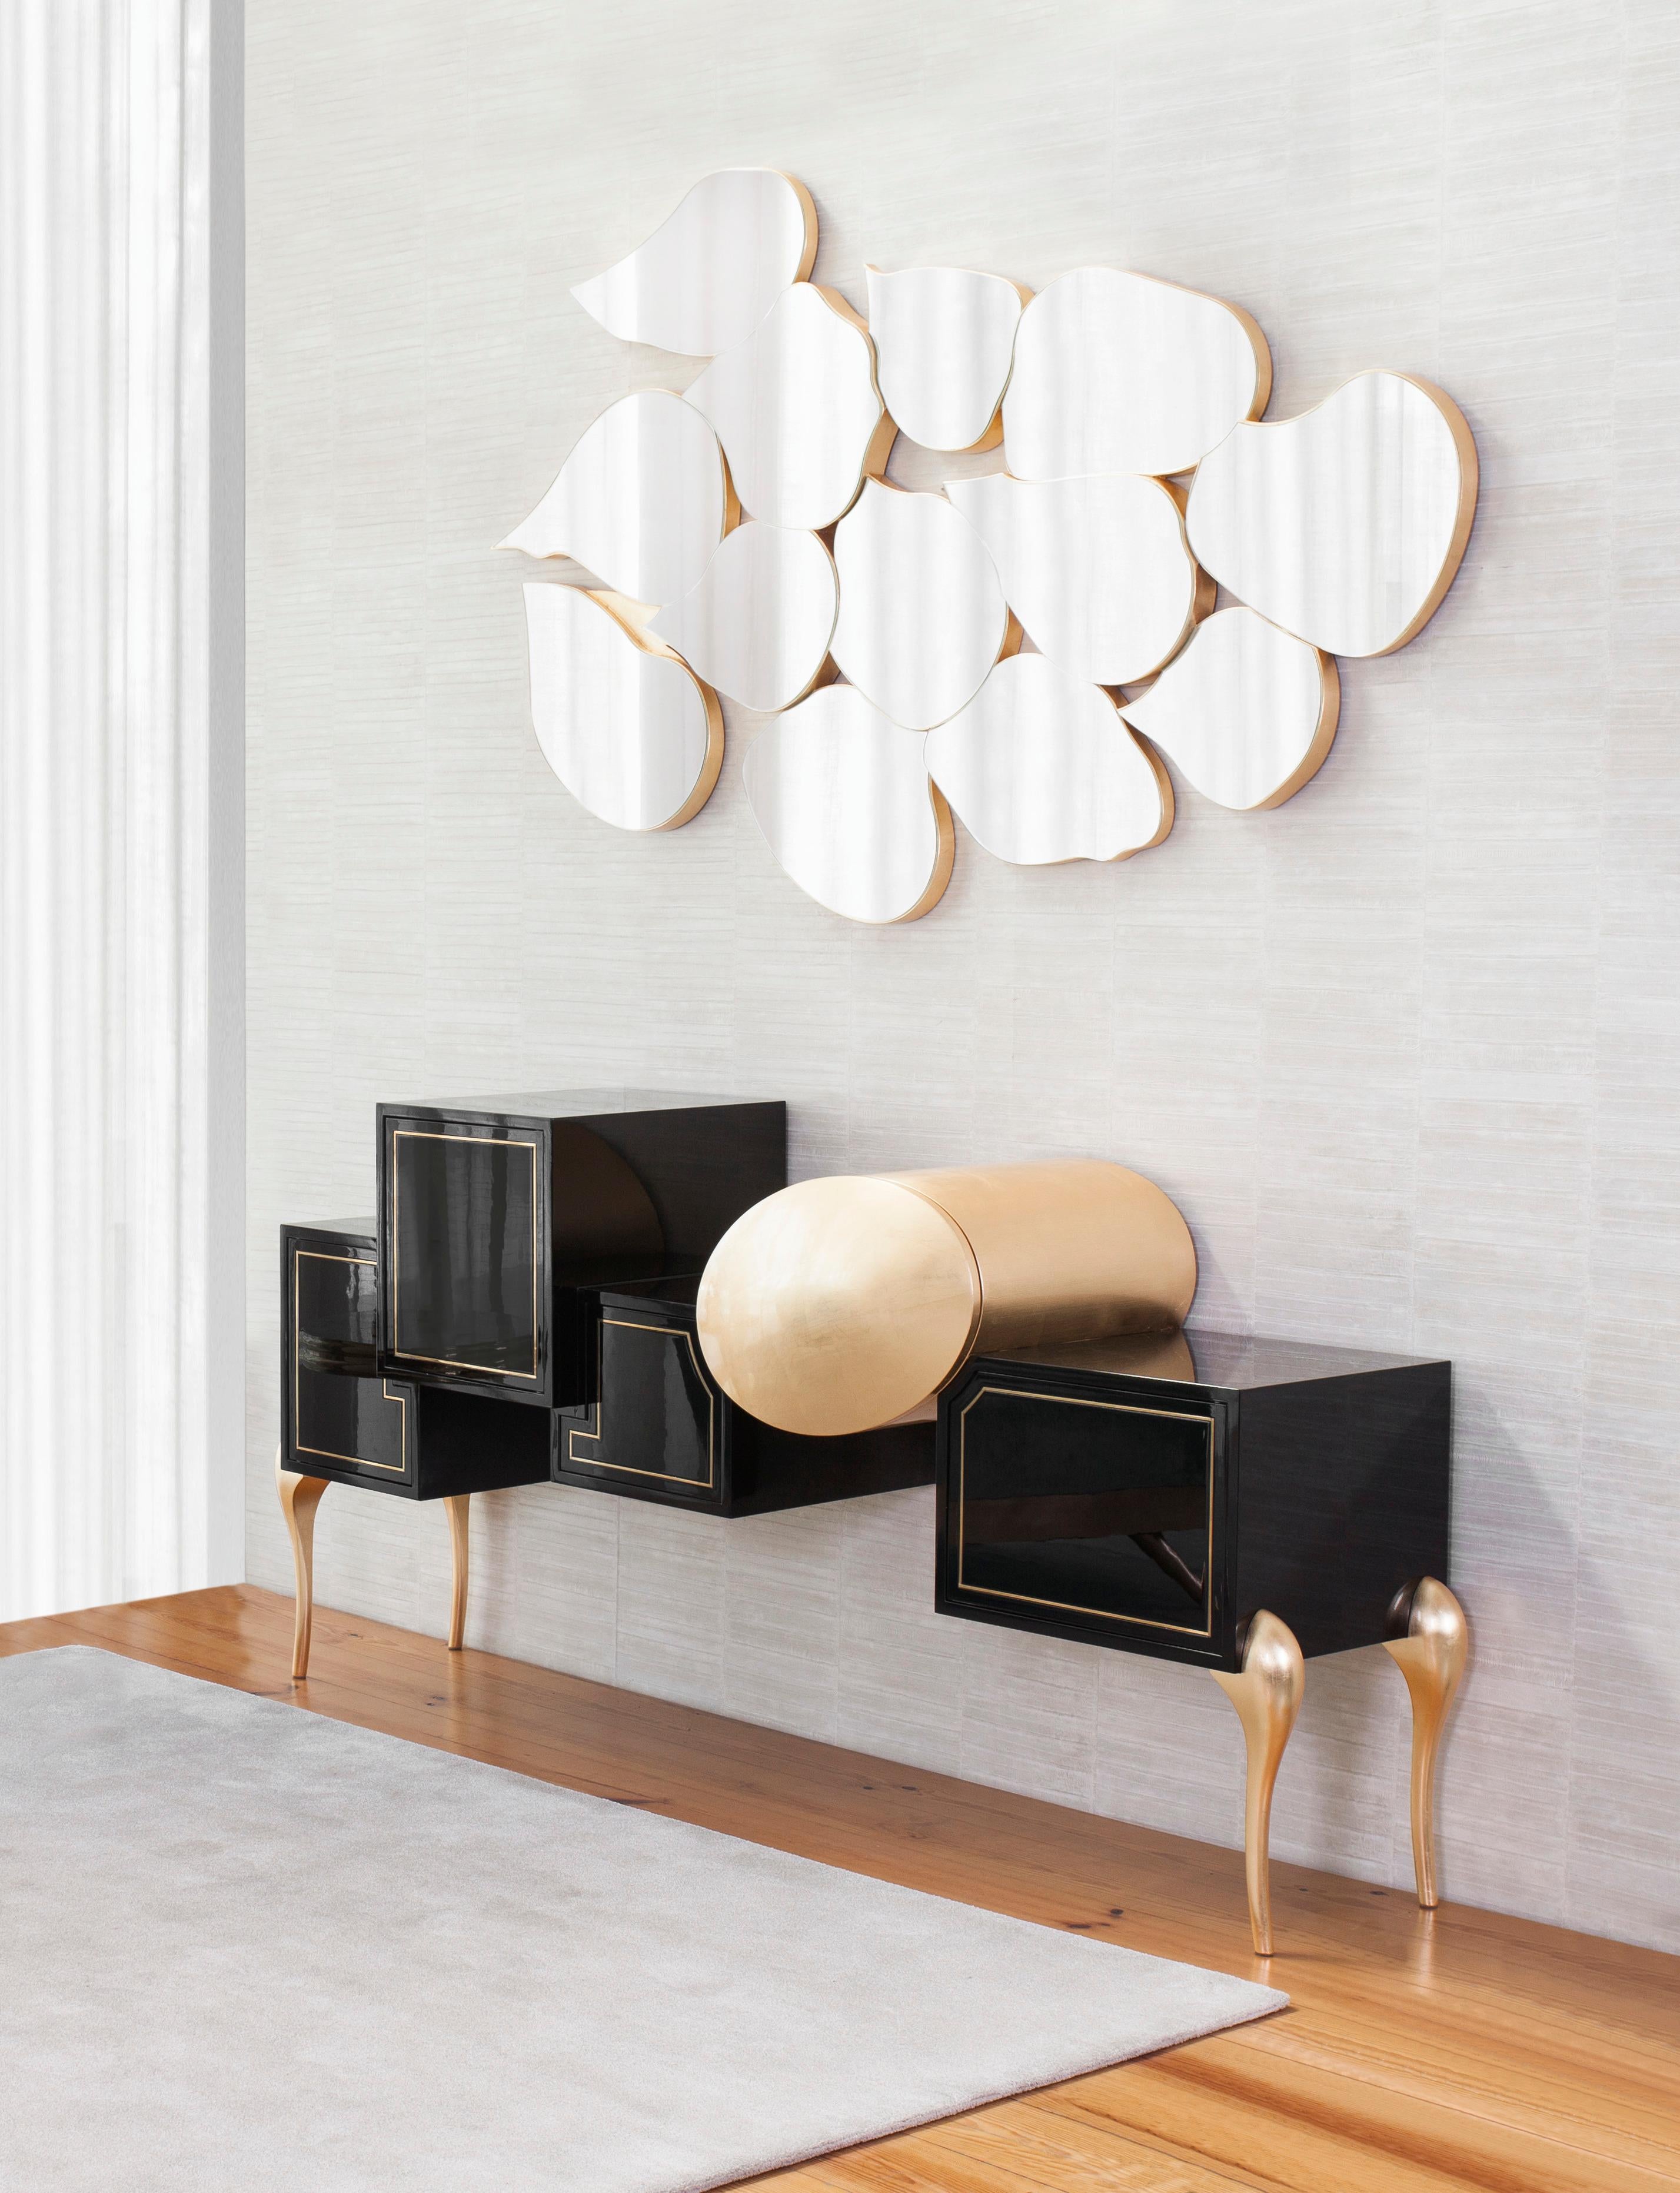 Sunshine Sideboard, Modern Collection, Handcrafted in Portugal - Europe by GF Modern.

The Sunshine art deco sideboard plays with the light and shade of geometric shapes, presenting a unique and distinctive design for contemporary interiors. The